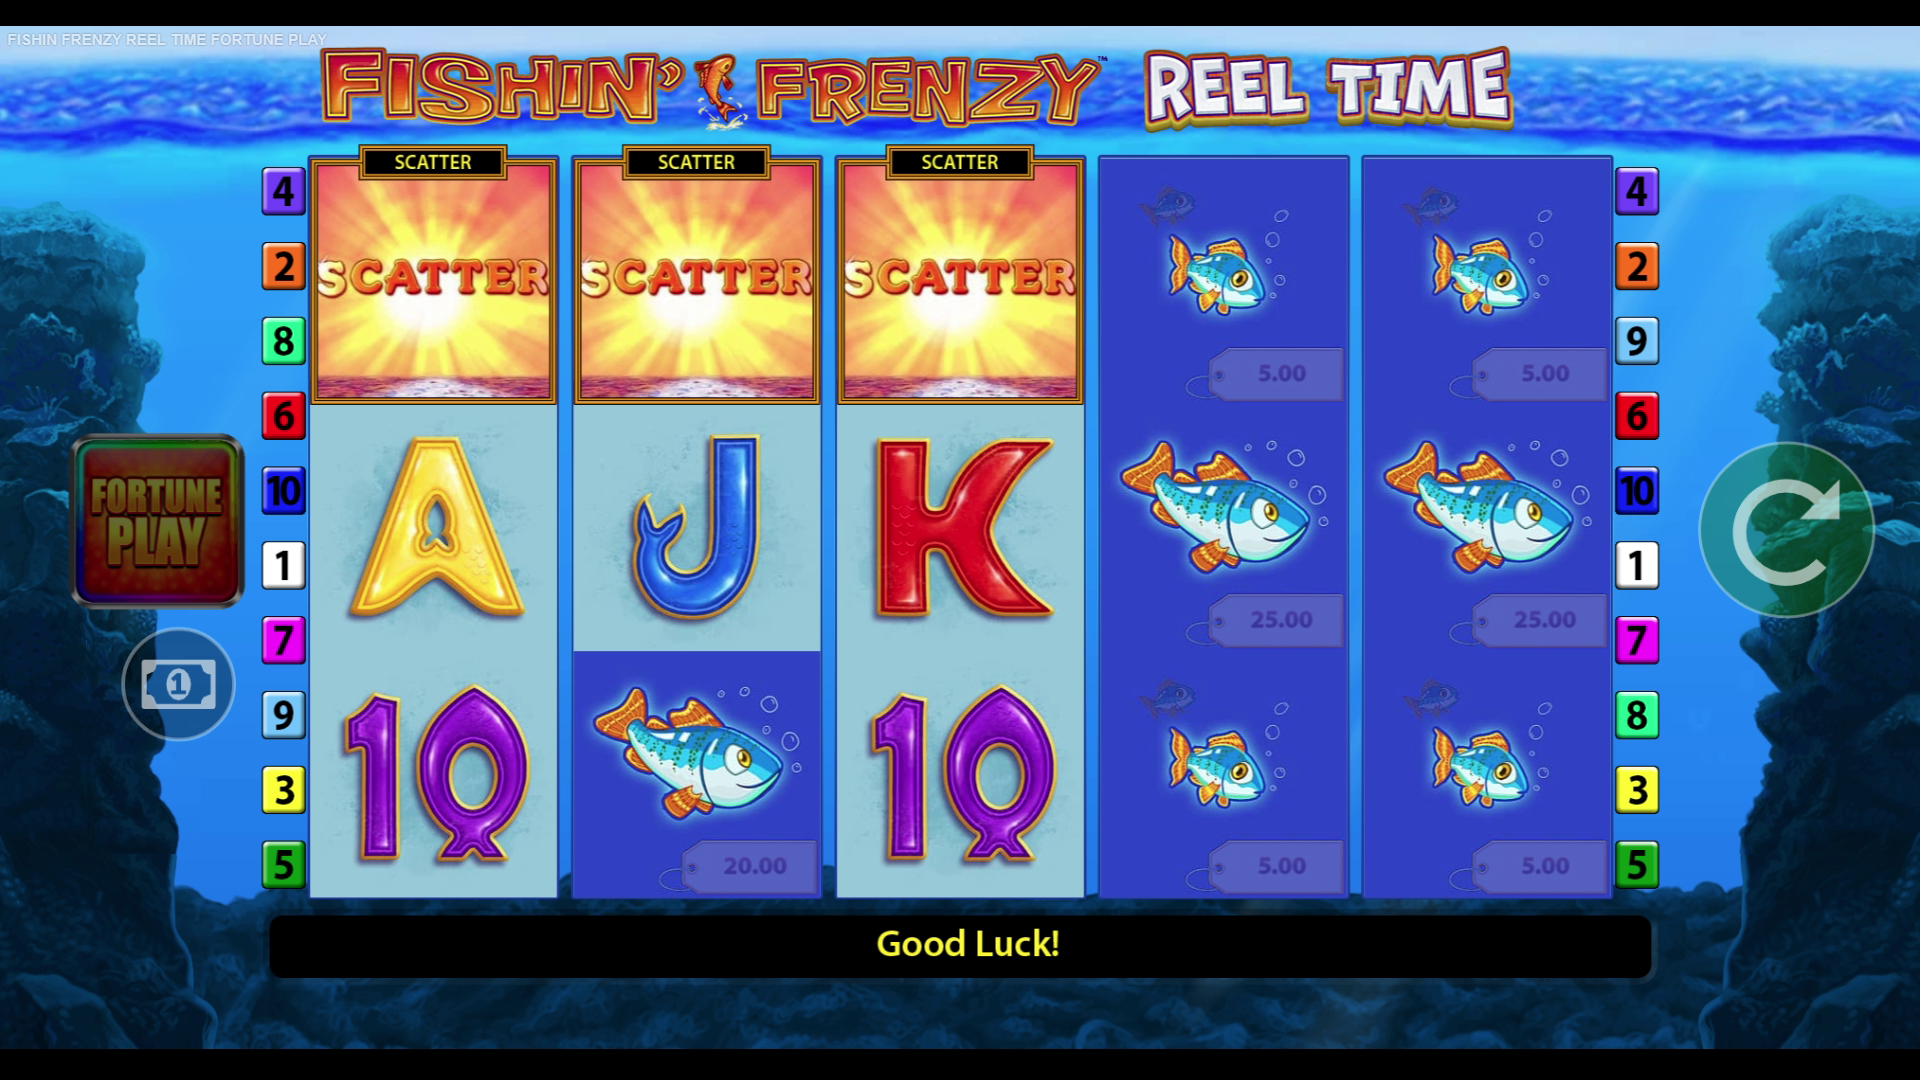 FISHIN FRENZY REEL TIME FORTUNE PLAY